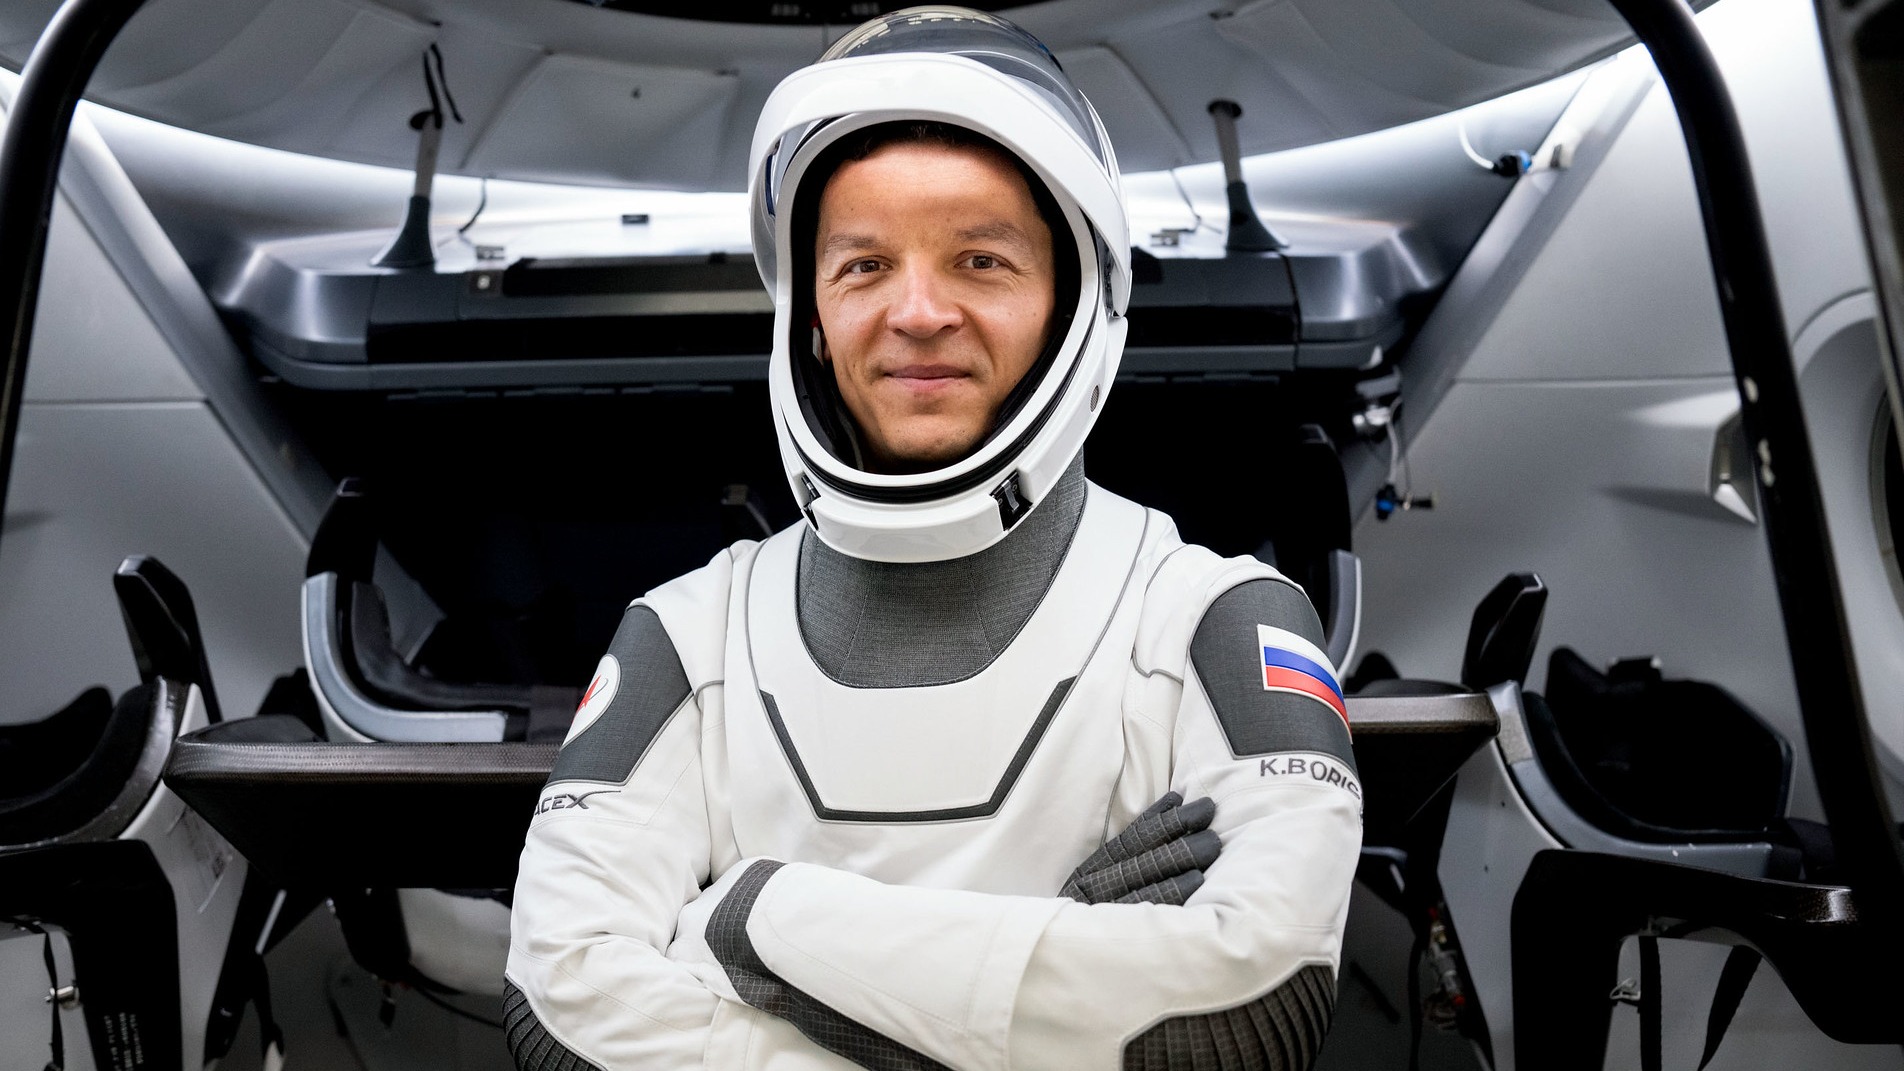 konstantin borisov in a spacesuit, crossing his arms in front of an open spacecraft hatch